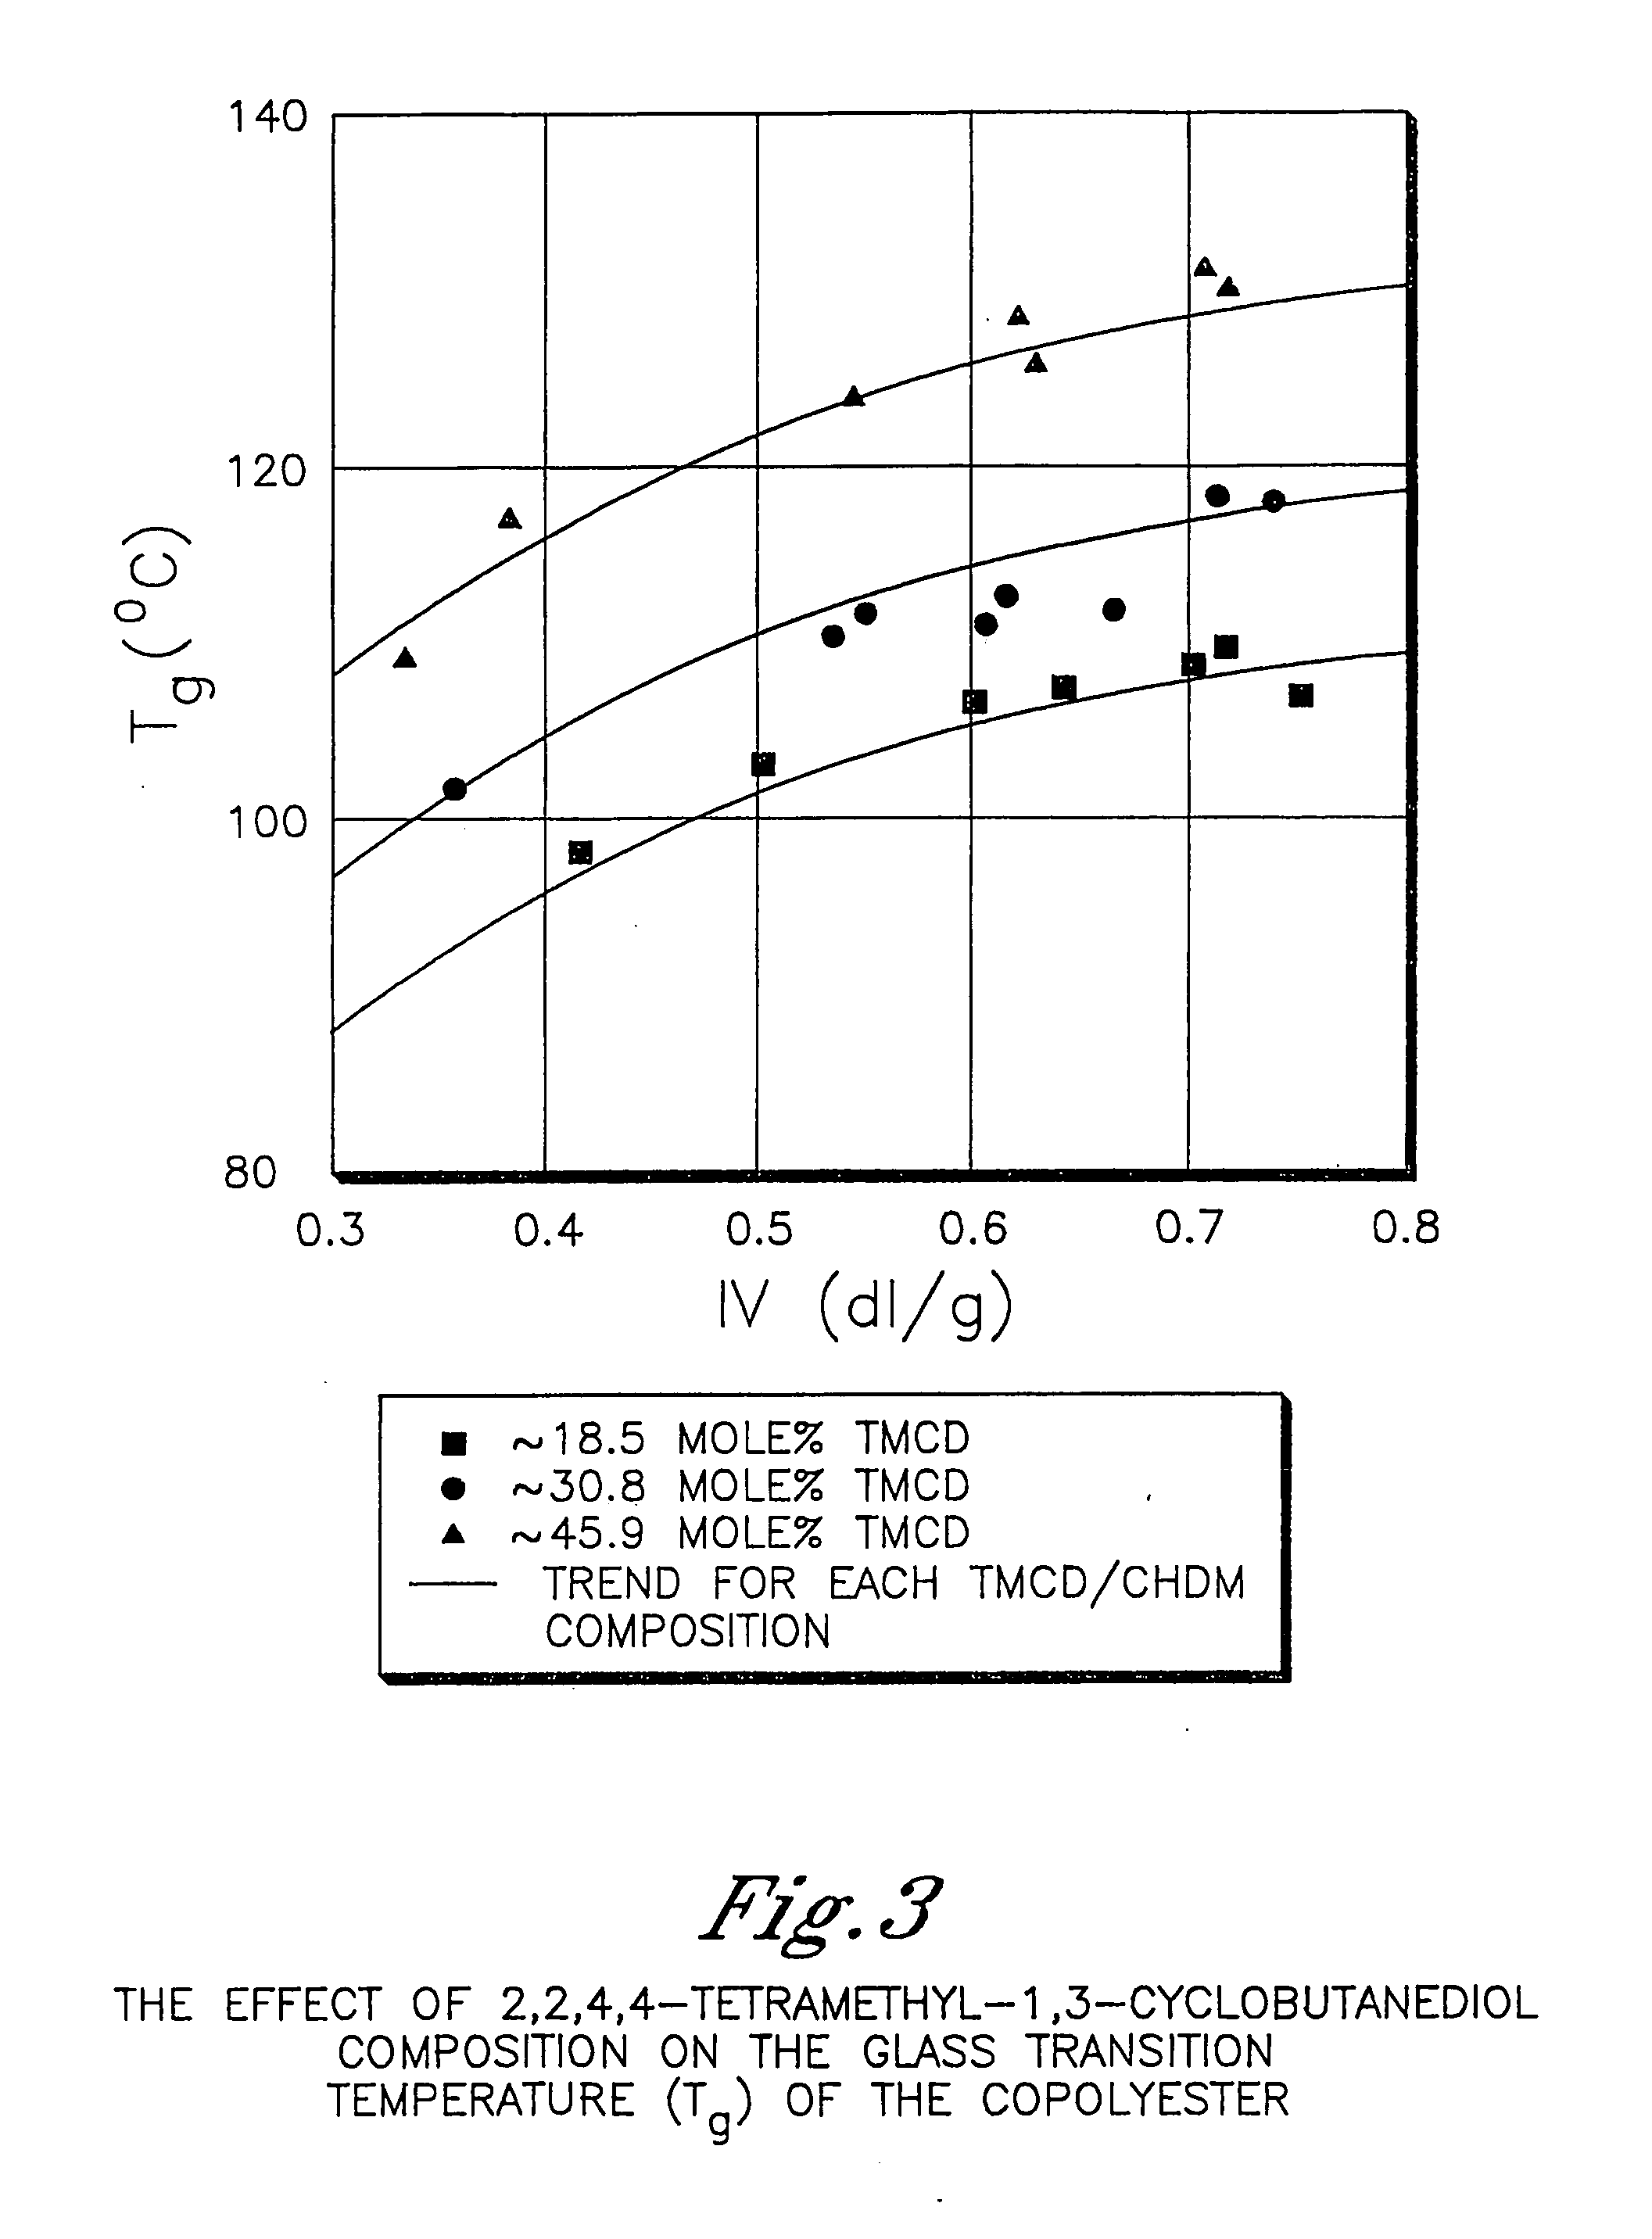 Appliance parts comprising polyester compositions formed from 2,2,4,4-tetramethyl-1,3-cyclobutanediol and 1,4-cyclohexanedimethanol